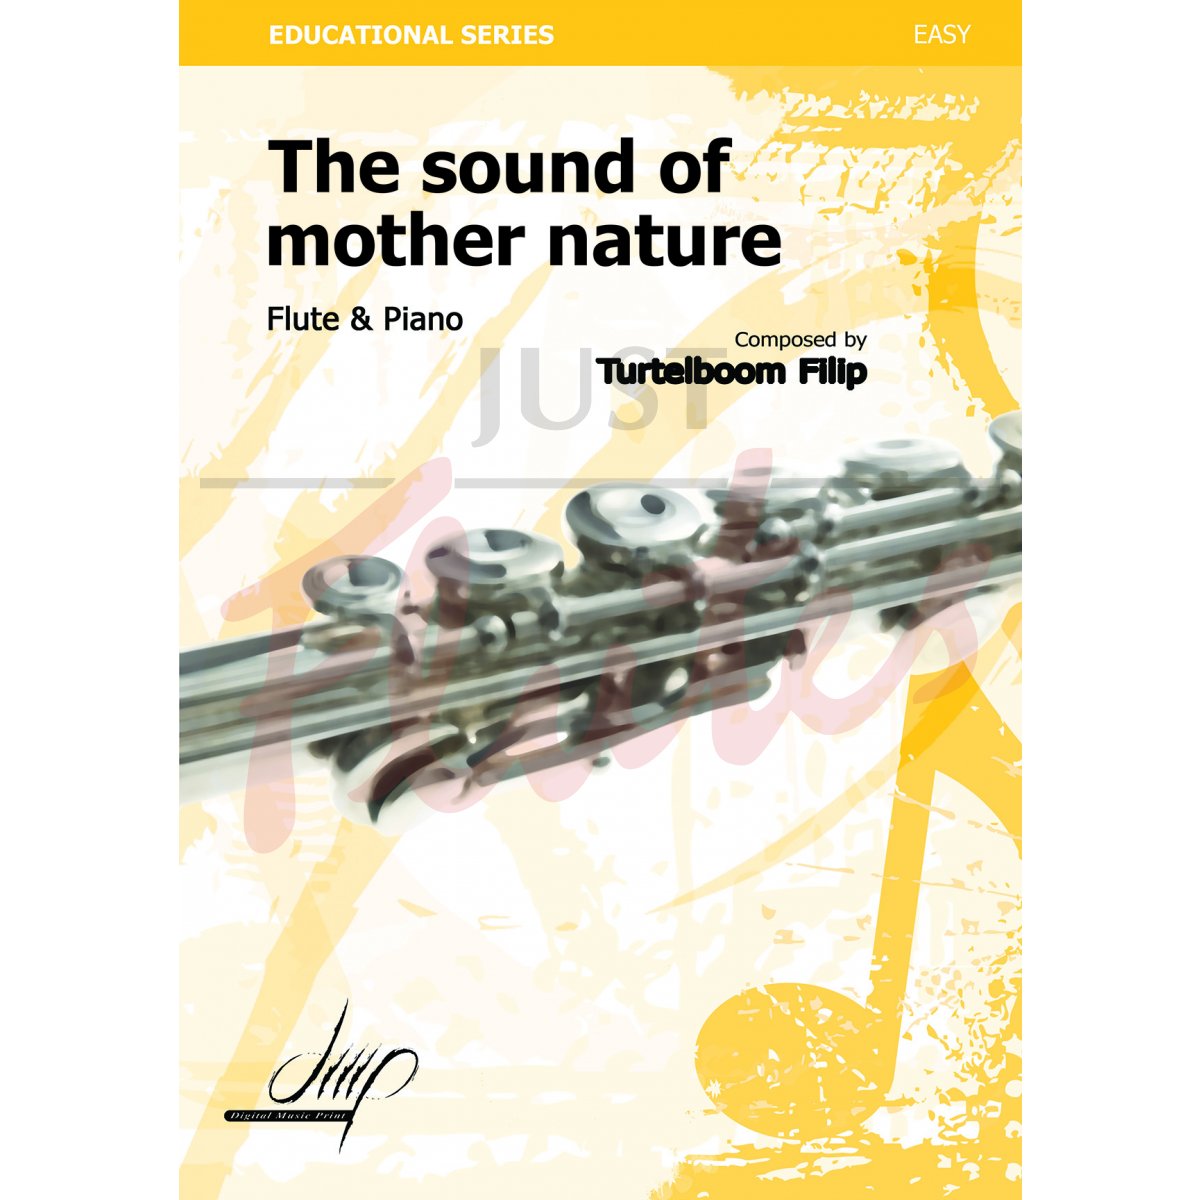 The sound of mother nature